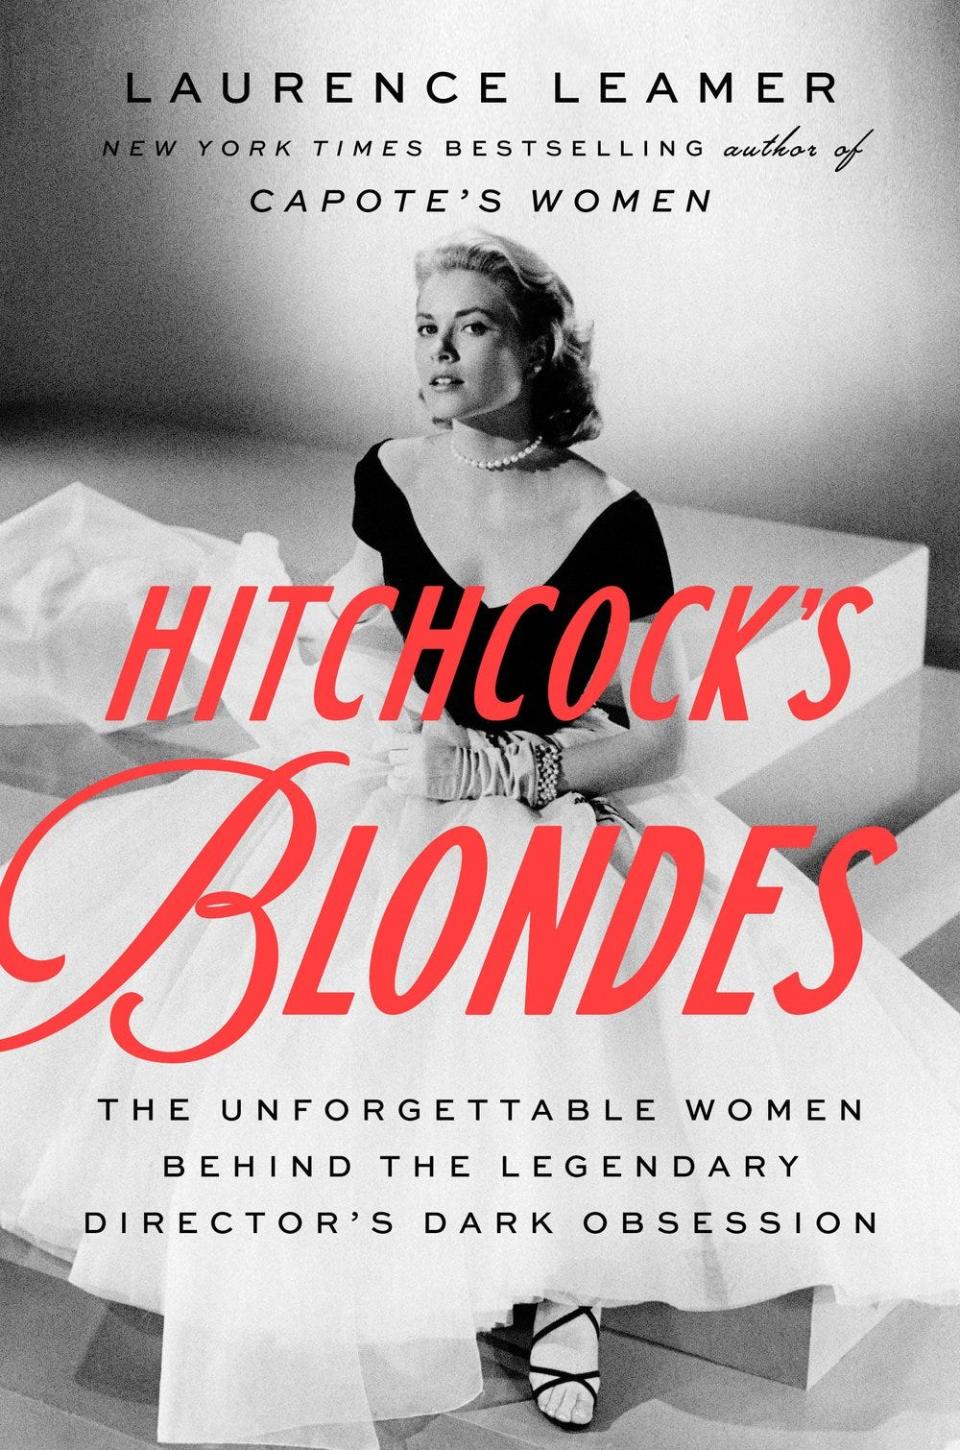 "Hitchcock's Blondes: The Unforgettable Women Behind the Legendary Director's Dark Obsession," by Laurence Leamer